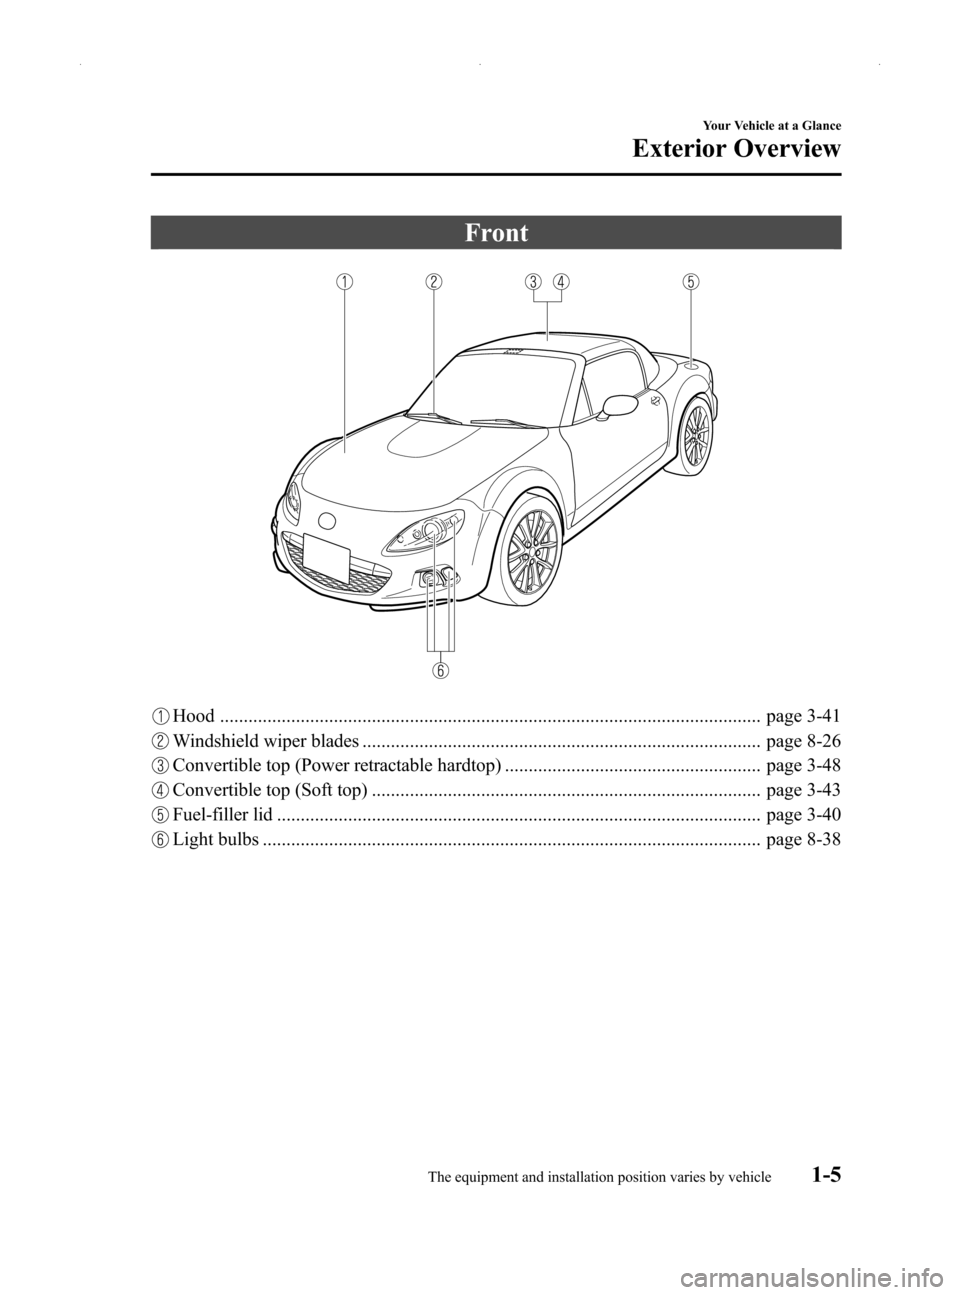 MAZDA MODEL MX-5 2014   (in English) User Guide Black plate (11,1)
Front
Hood .................................................................................................................. page 3-41
Windshield wiper blades .....................